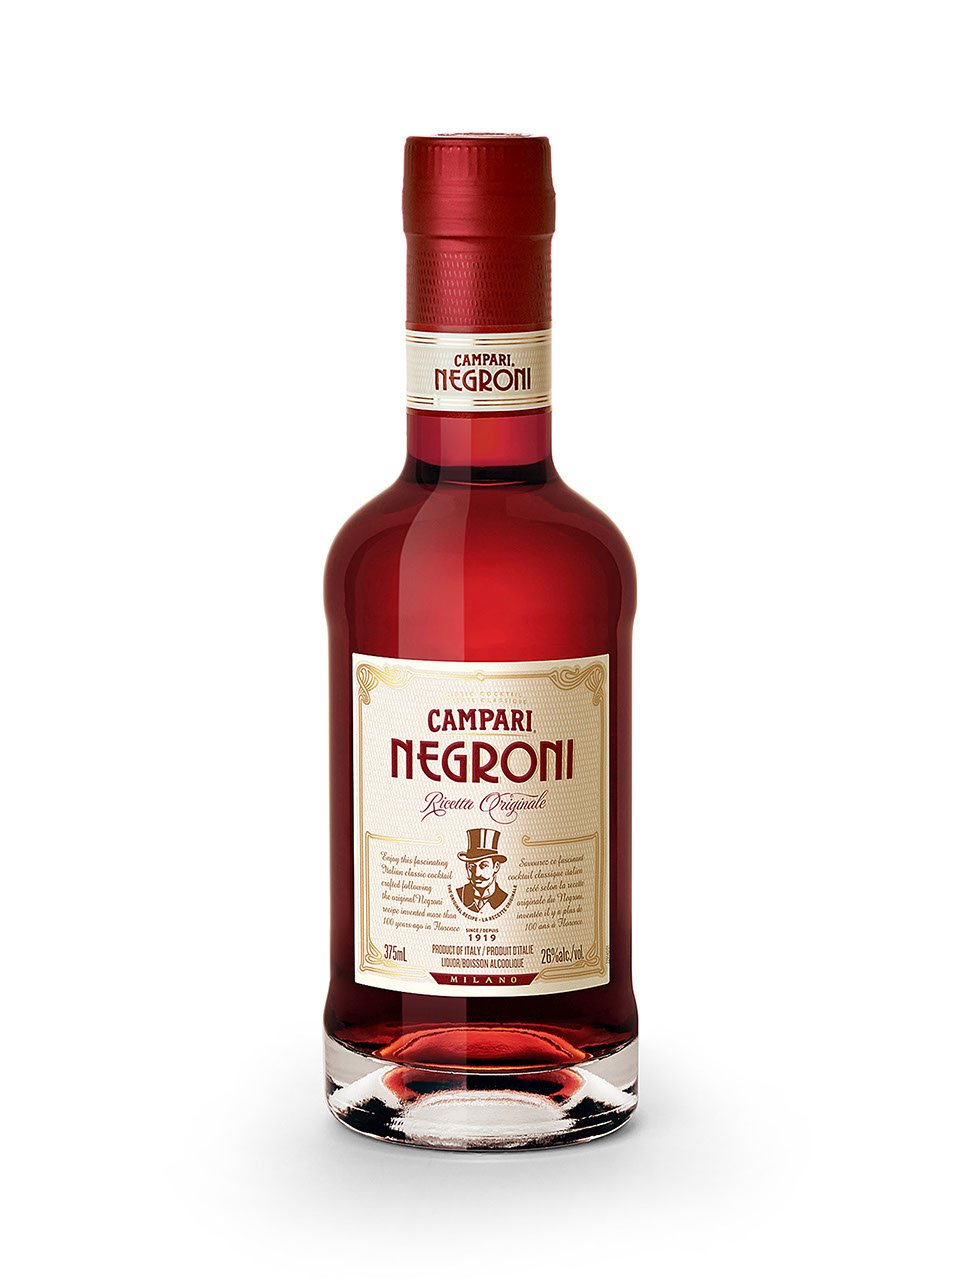 A bottle of campari's bottled negroni cocktail